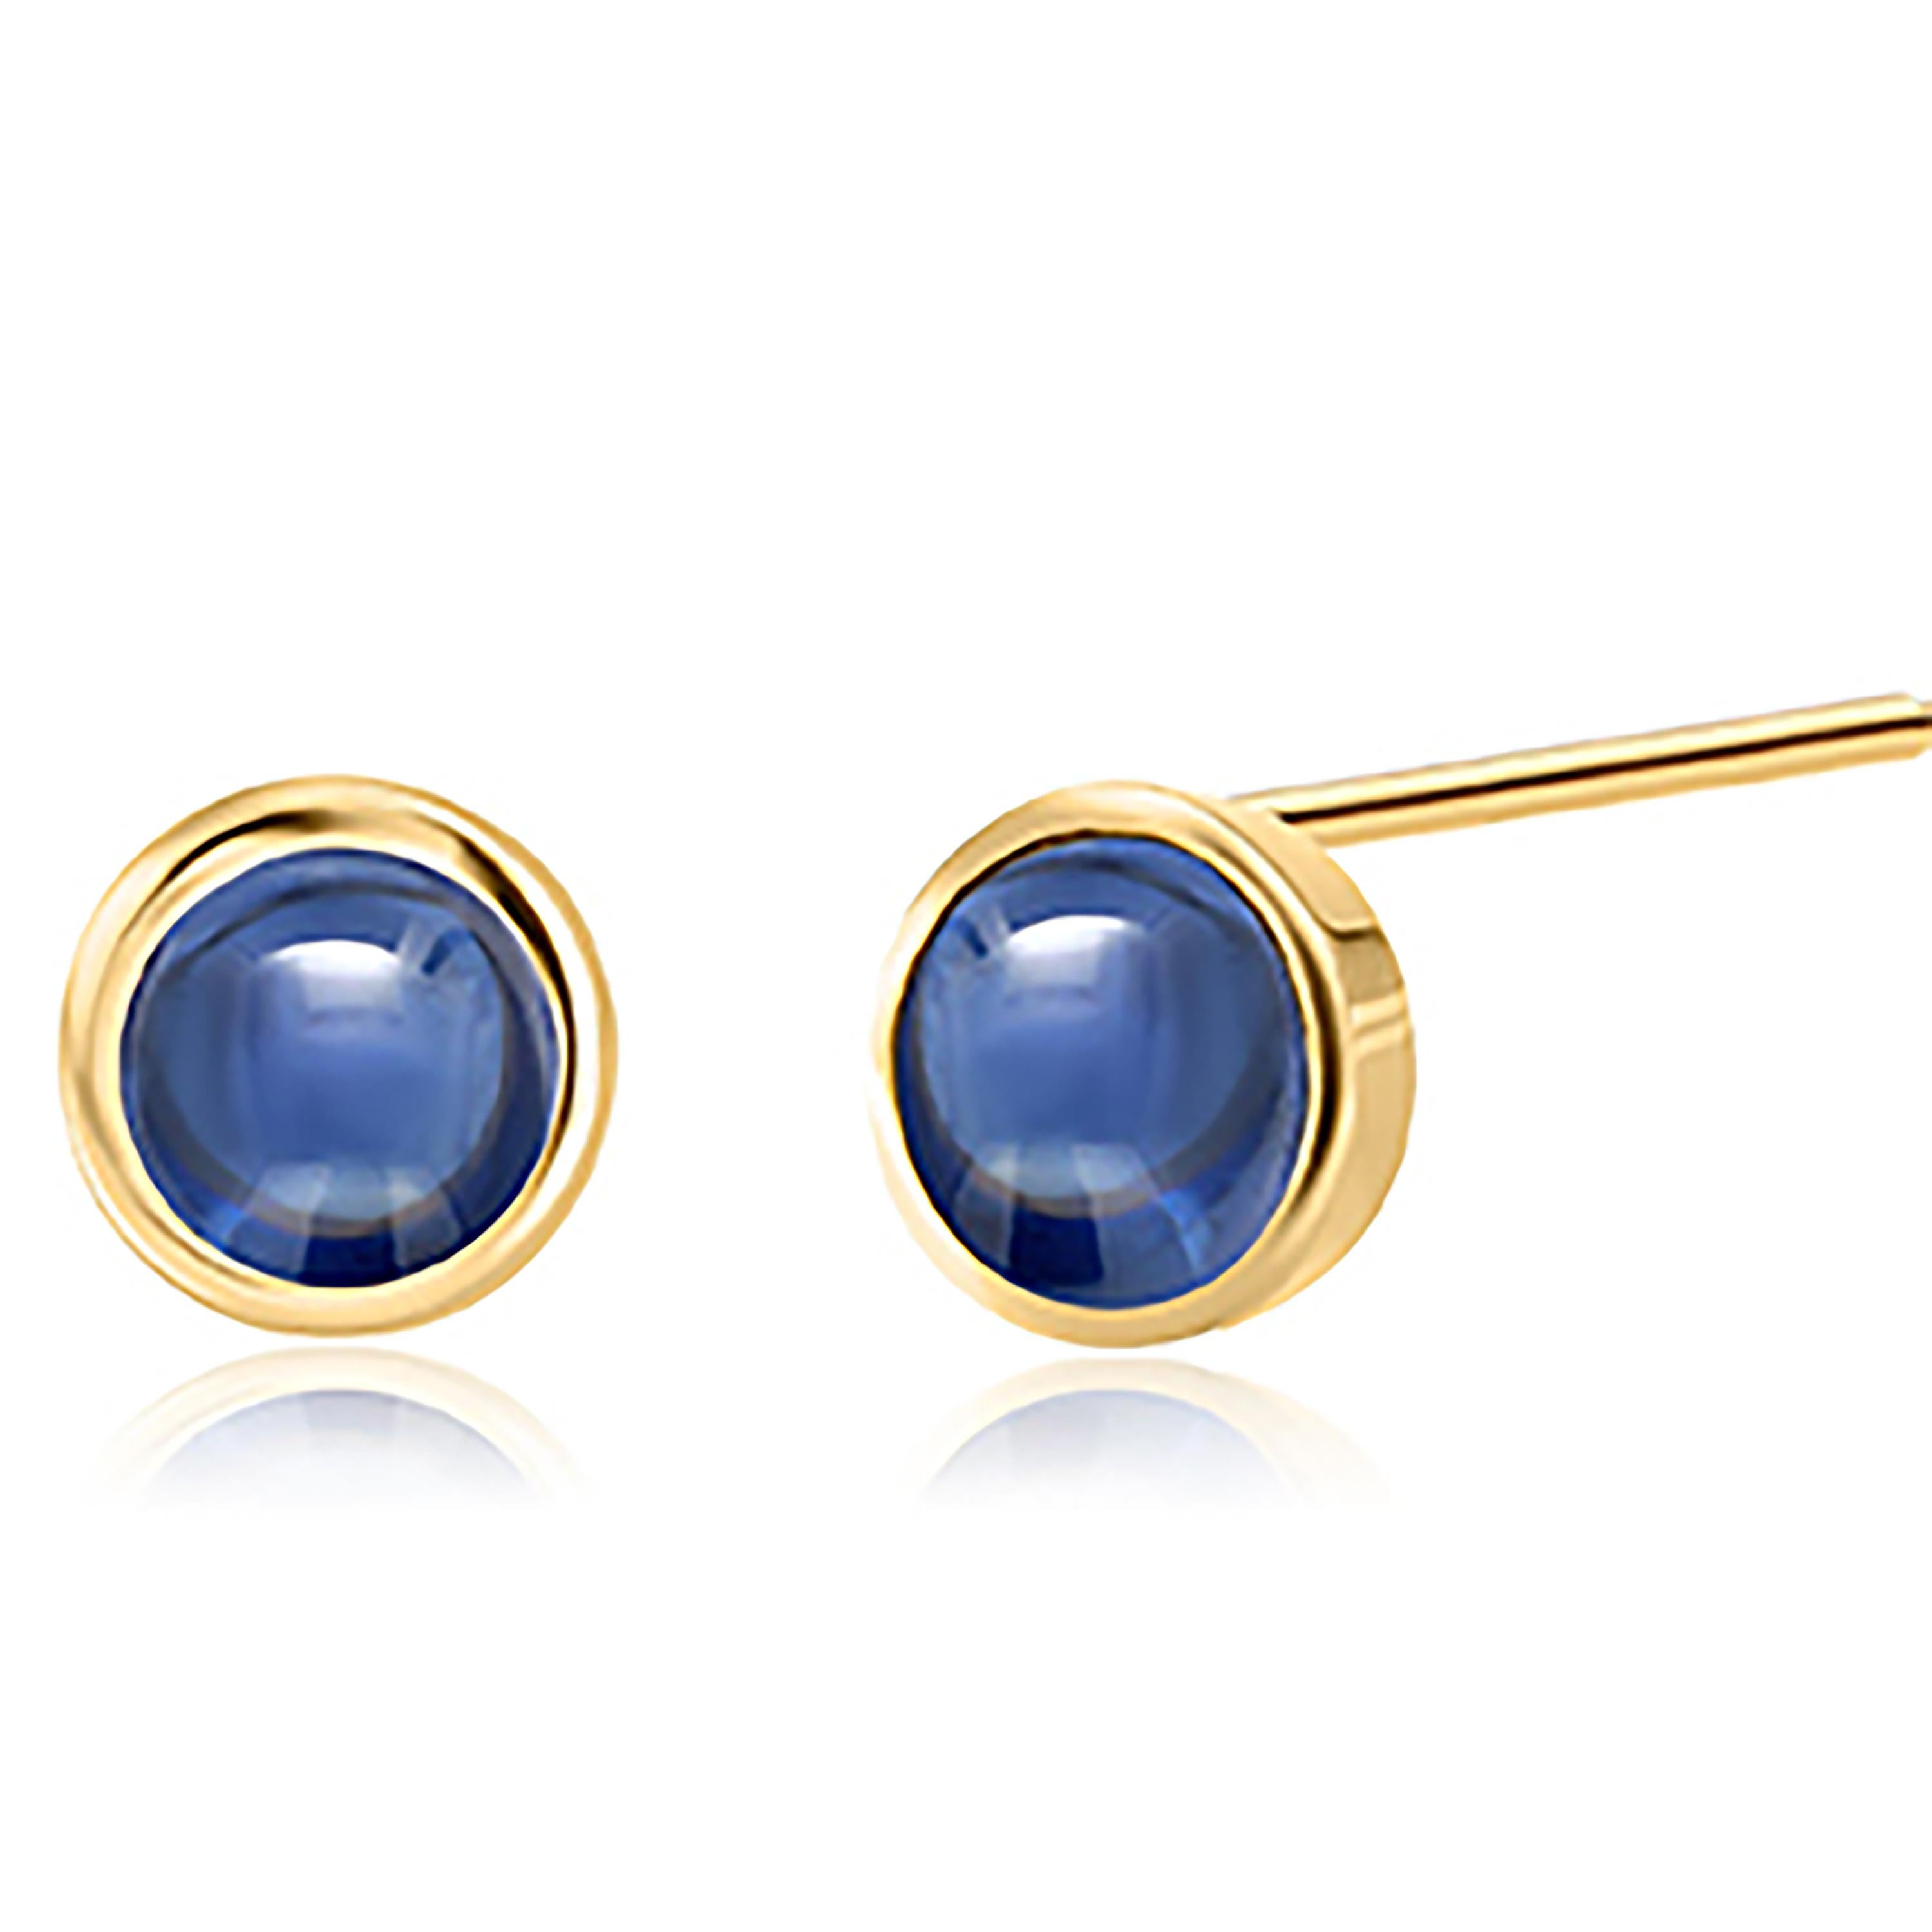 Round Cut Matched Cabochon Sapphires 1.45 Carat Bezel Set Yellow Gold 0.25 Inch Earrings For Sale